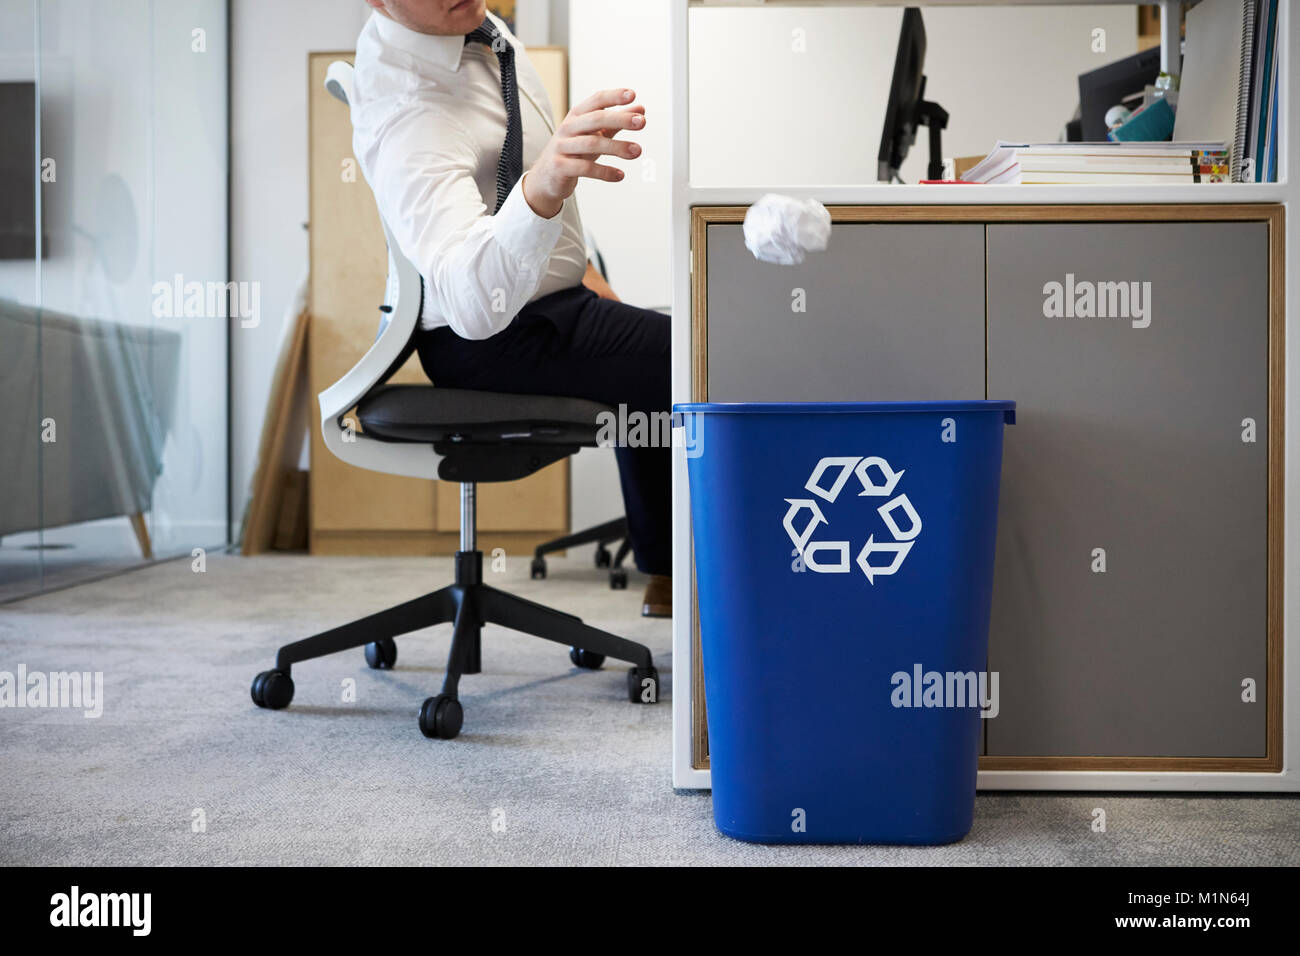 Man at desk throwing screwed up paper into recycling bin Stock Photo